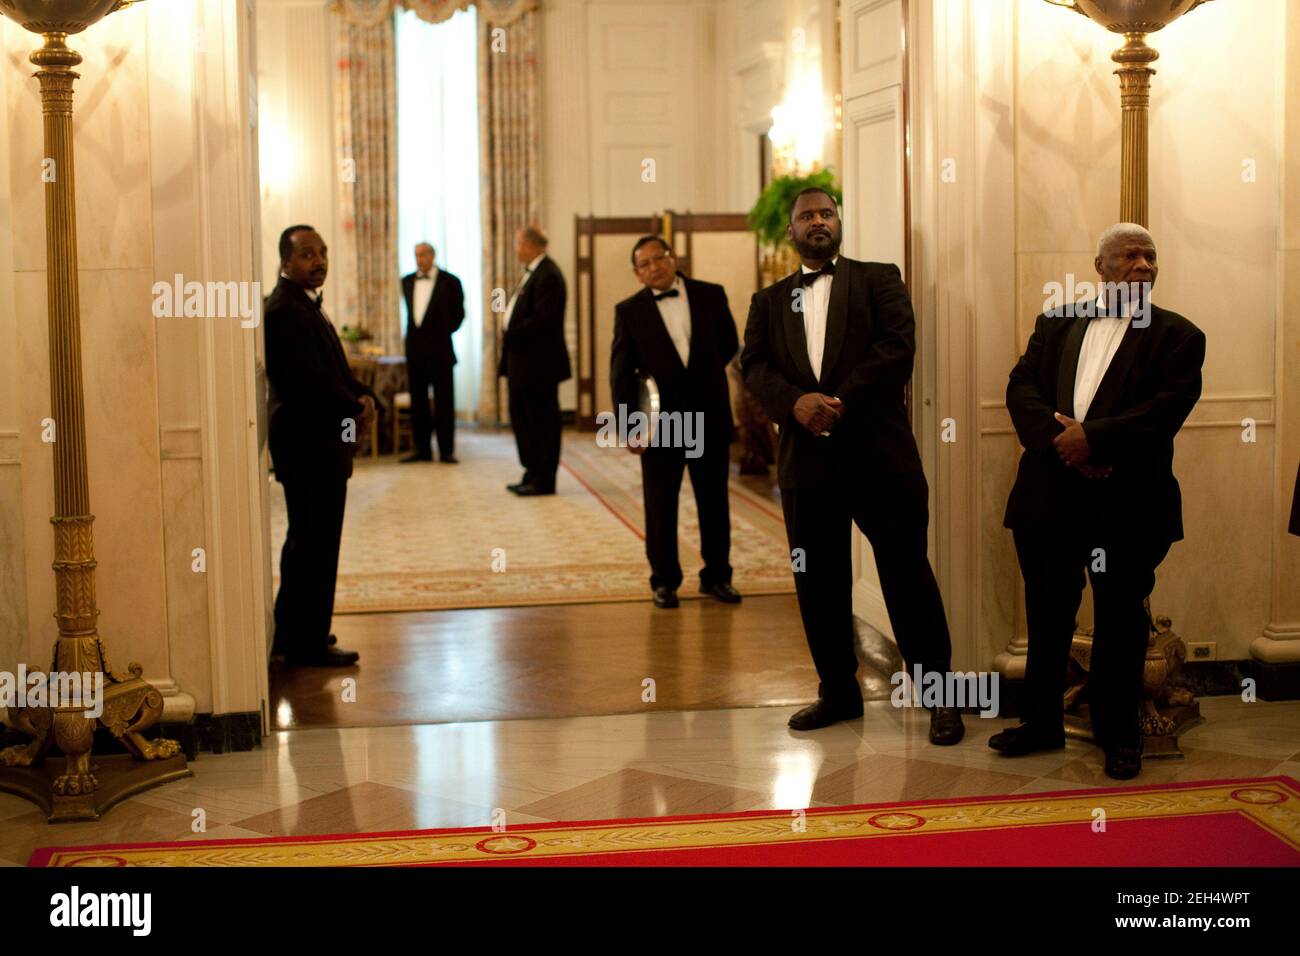 White House butlers watch as President Barack Obama makes his way towards the State Dining Room of the White House at the conclusion of a ceremony commemorating the enactment of the Matthew Shepard and James Byrd Jr. Hate Crimes Prevention Act, Oct. 28, 2009. Stock Photo